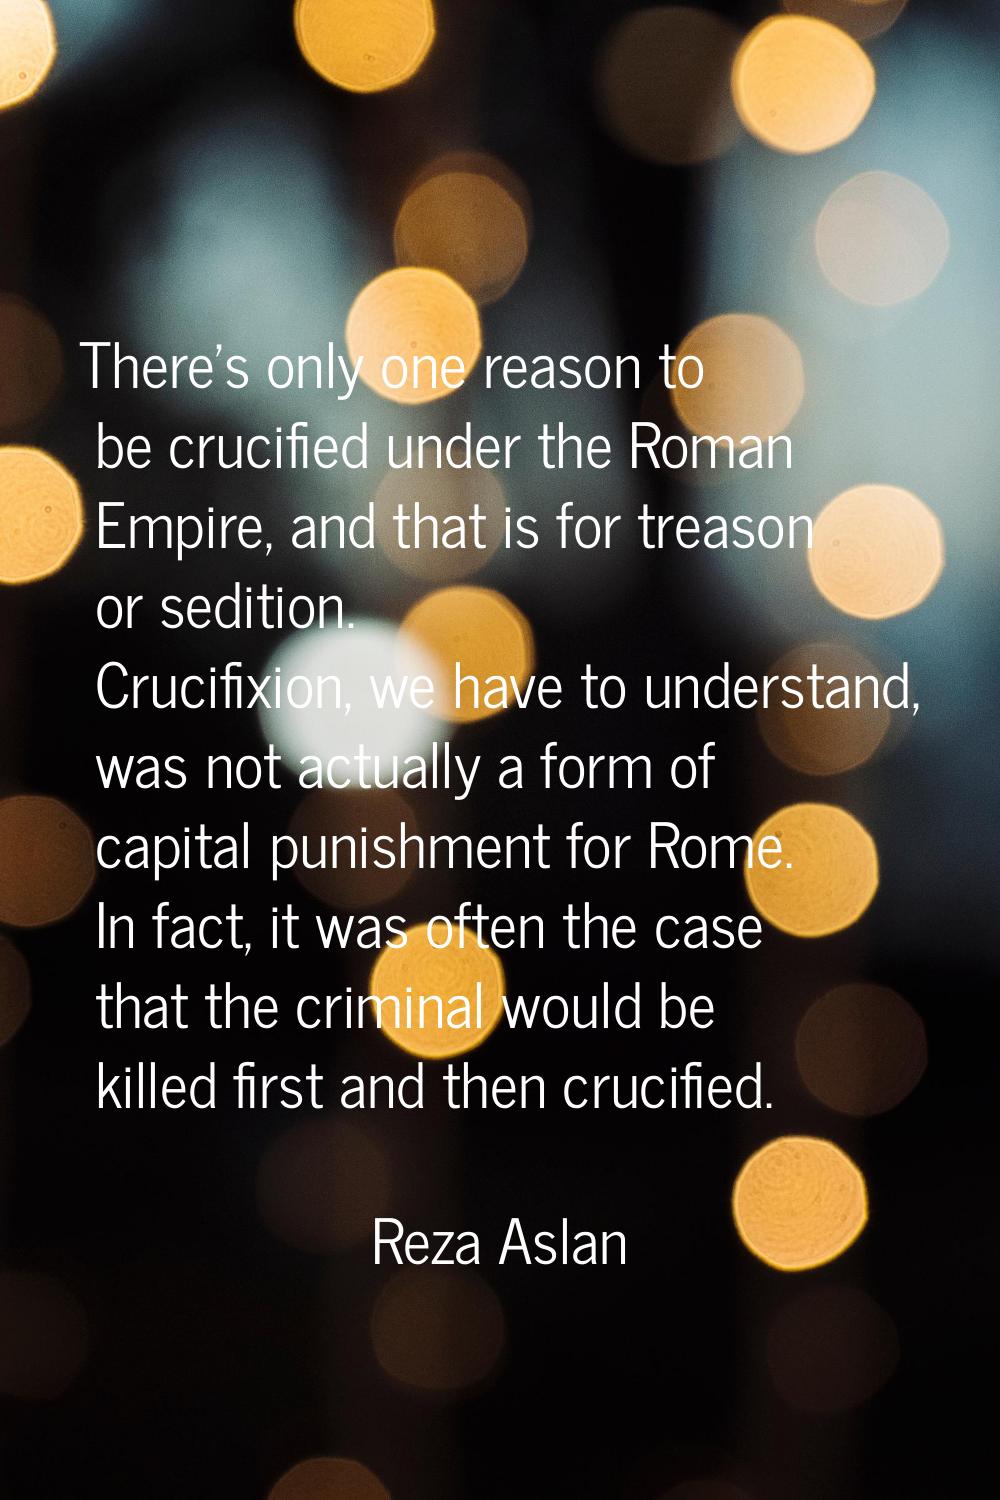 There's only one reason to be crucified under the Roman Empire, and that is for treason or sedition